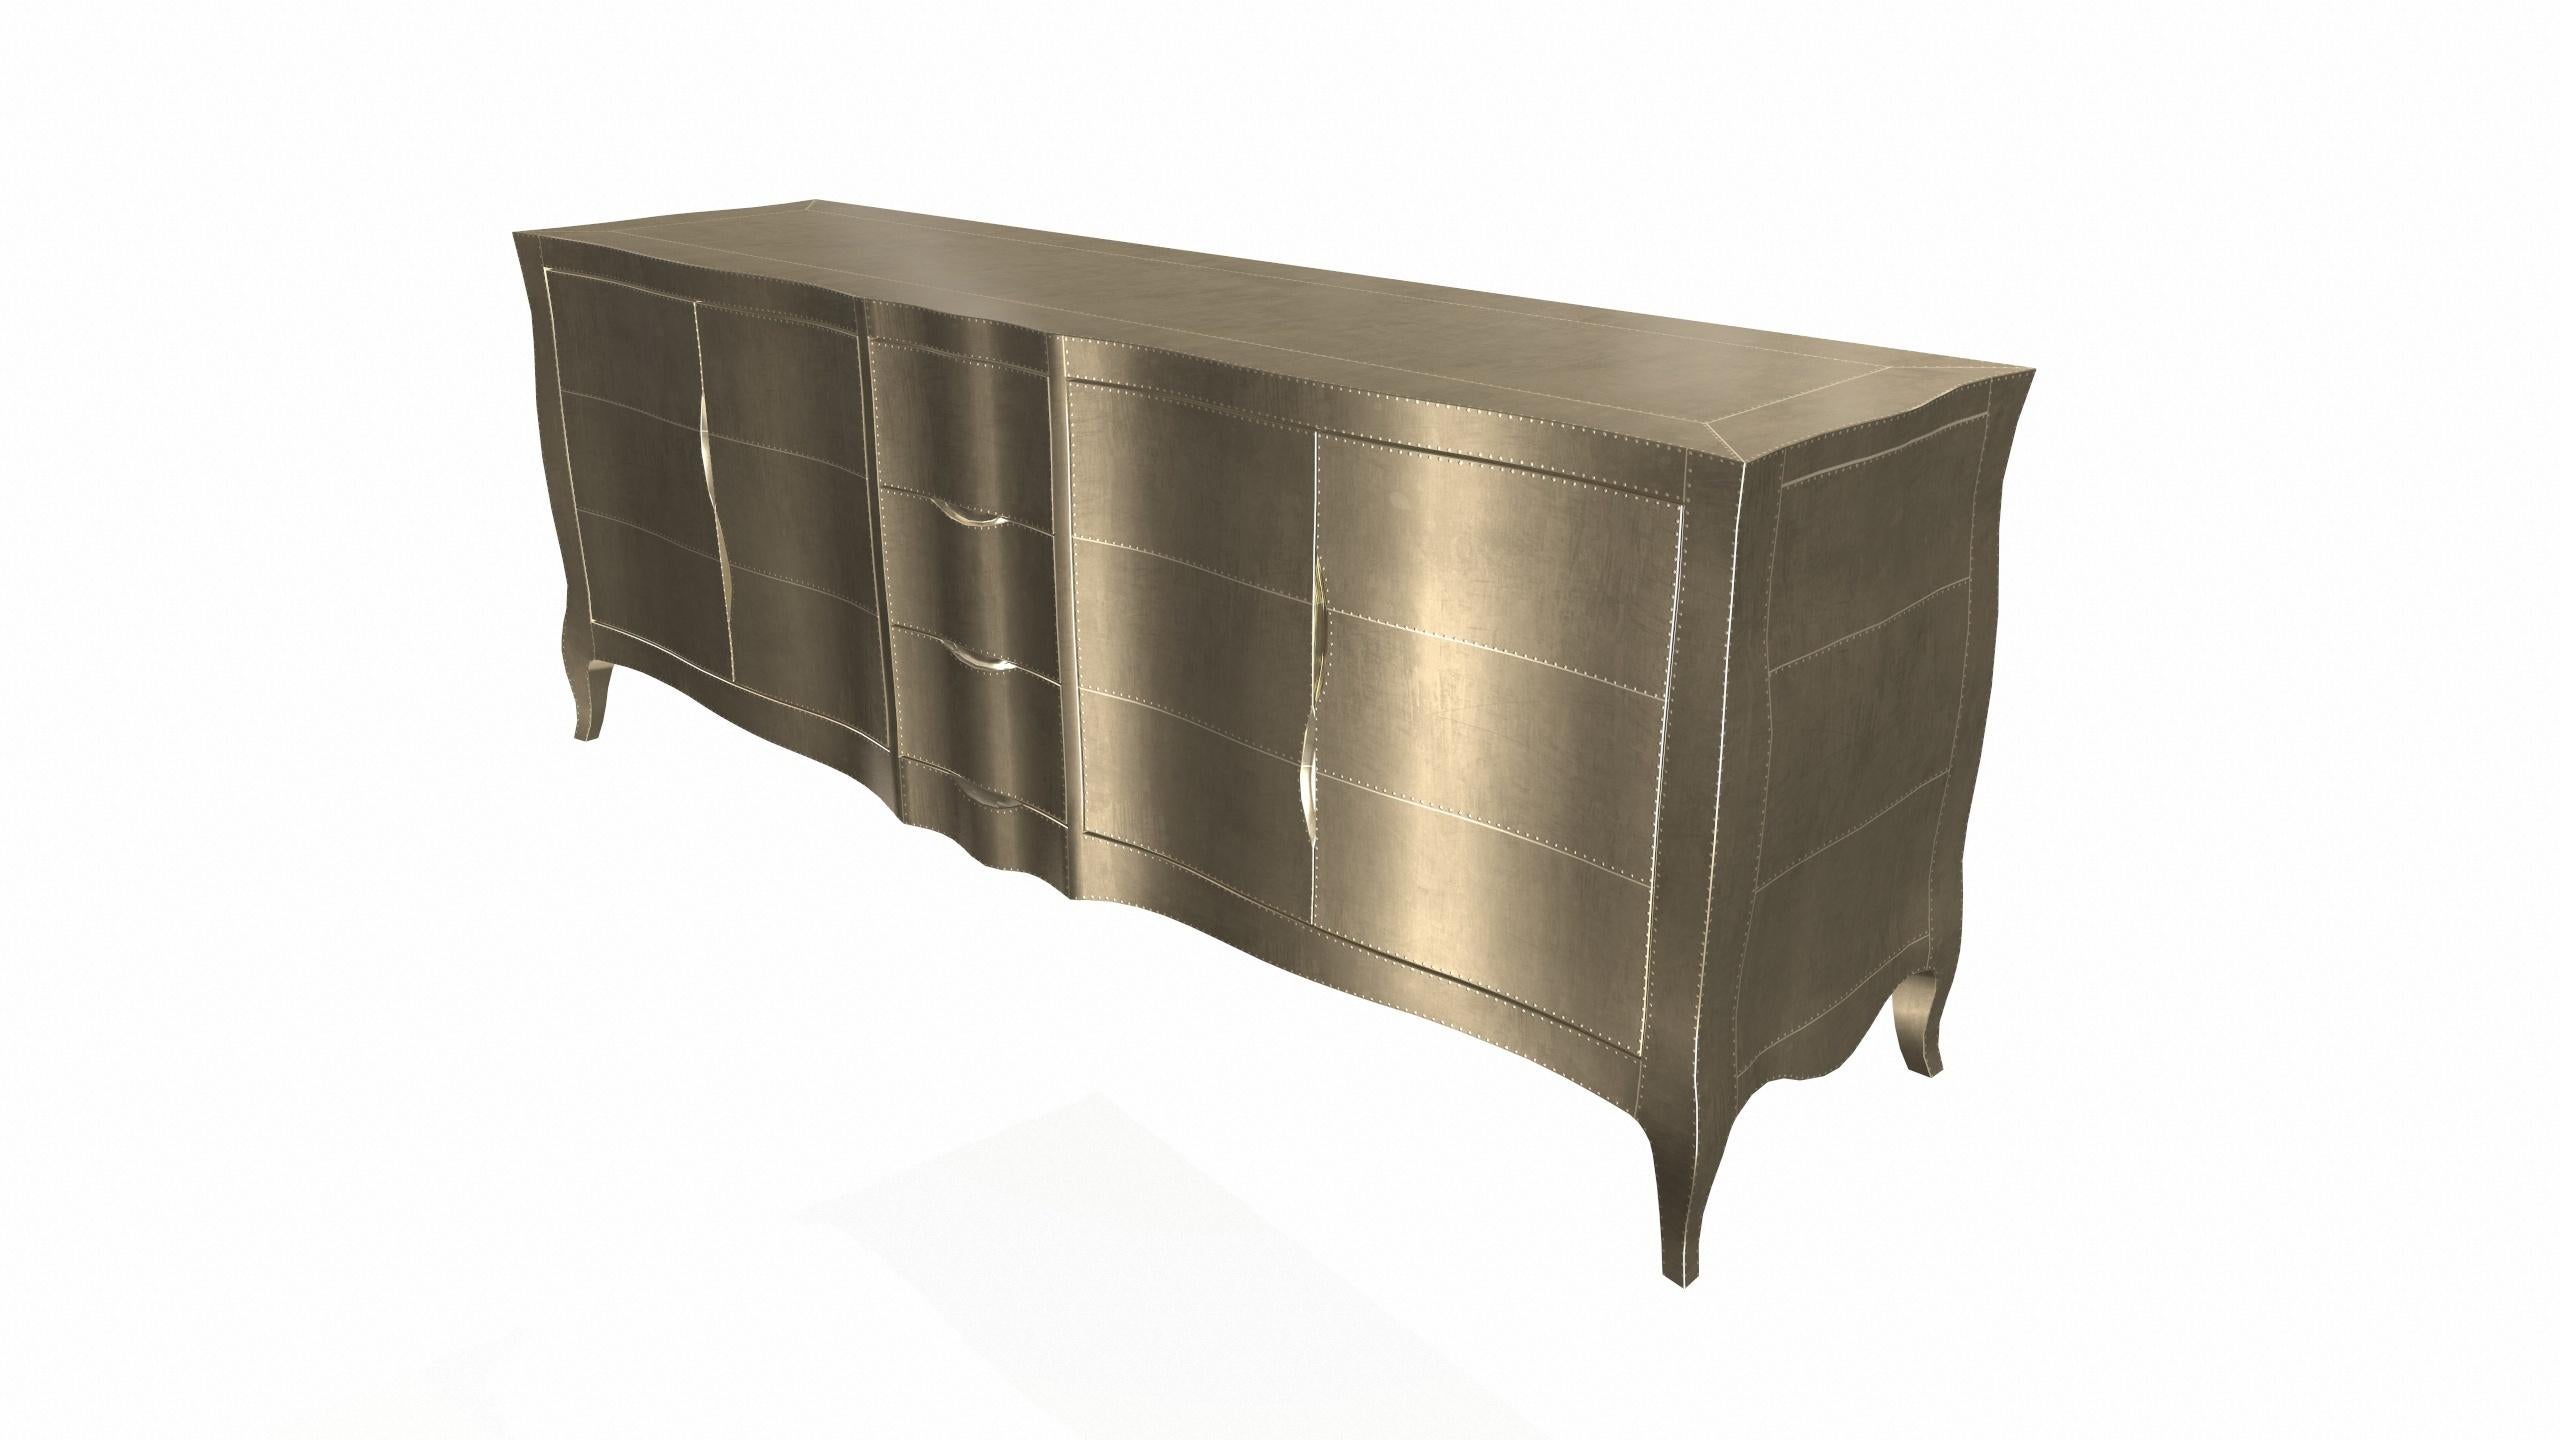 American Louise Credenza Art Deco Bookcases in Smooth Brass by Paul Mathieu For Sale